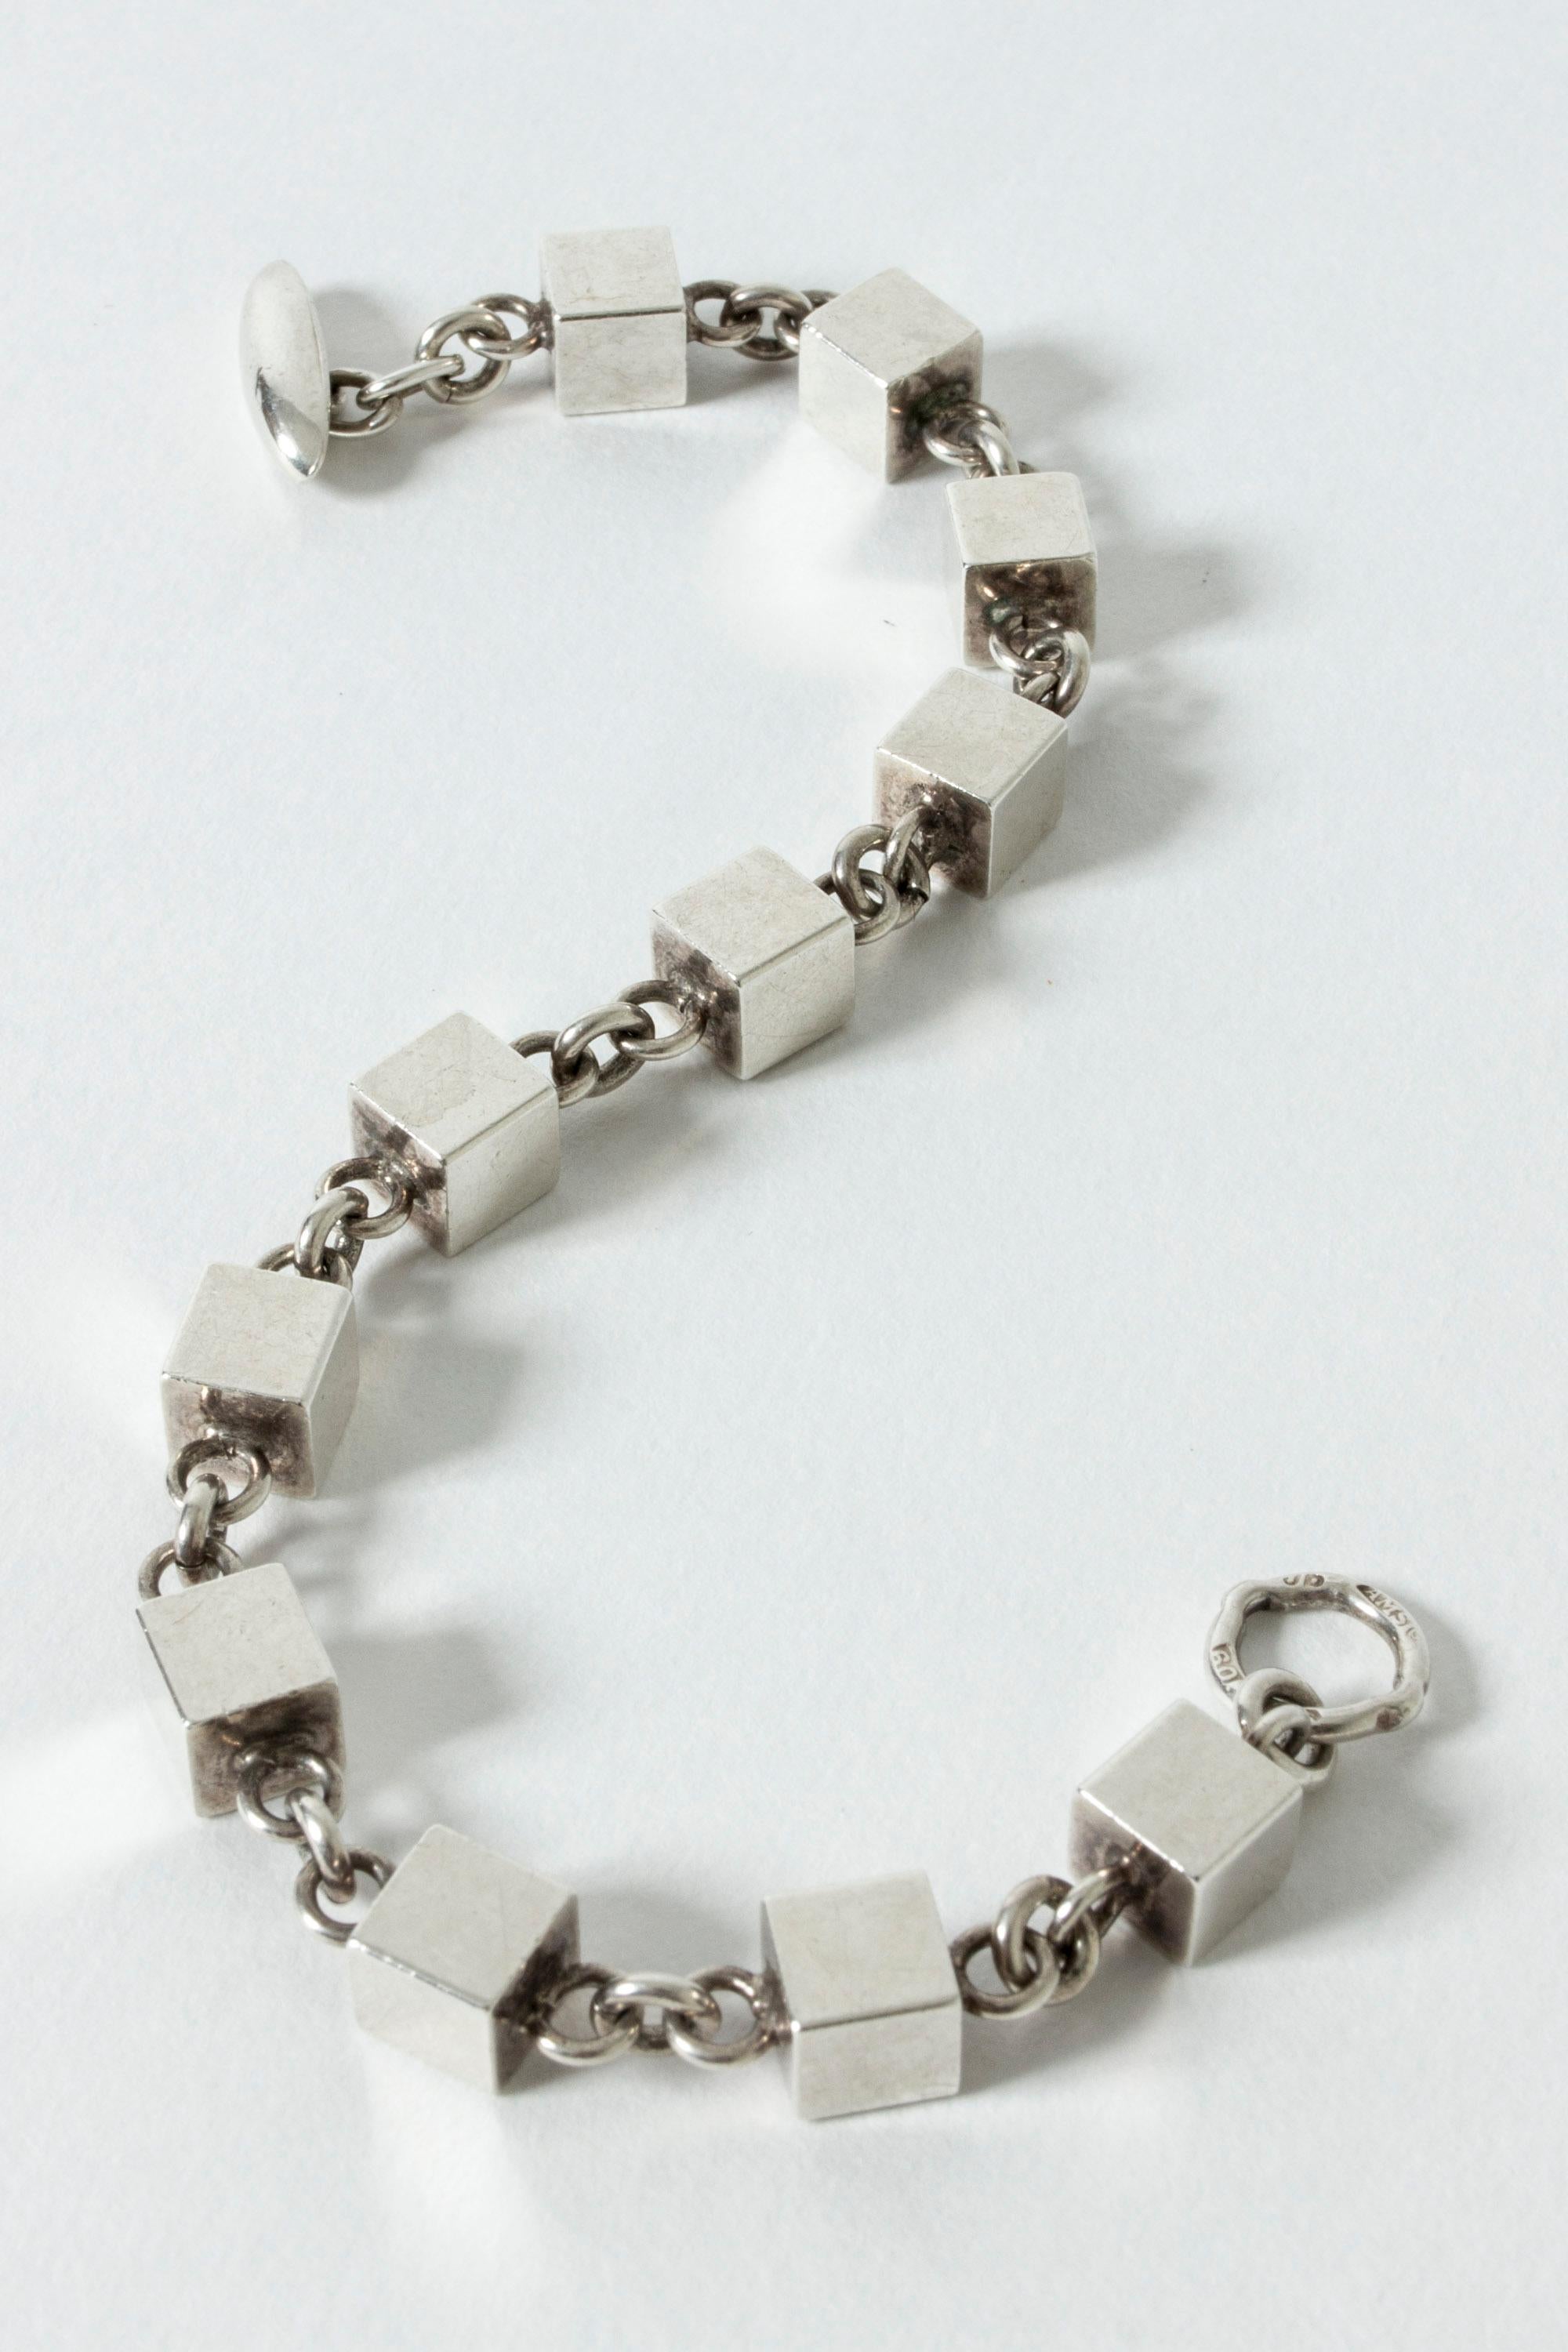 Very elegant silver bracelet by Arvo Saarela, made from numerous interlocking cubes. Solid cubes, weighty quality. Nice contrast with the neat chains.